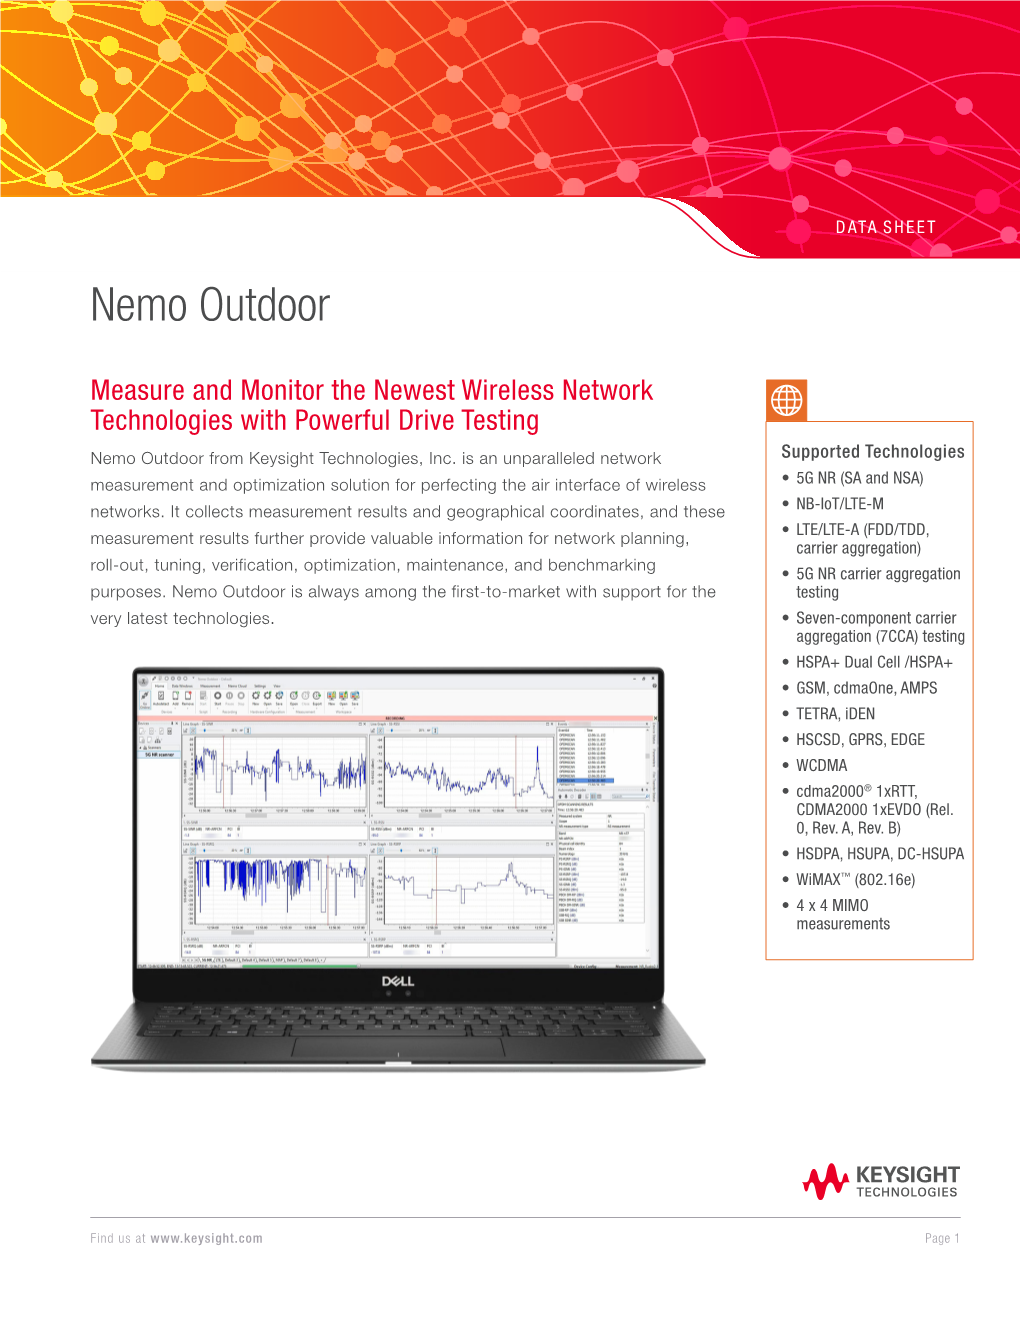 Nemo Outdoor Measure and Monitor the Newest Wireless Network